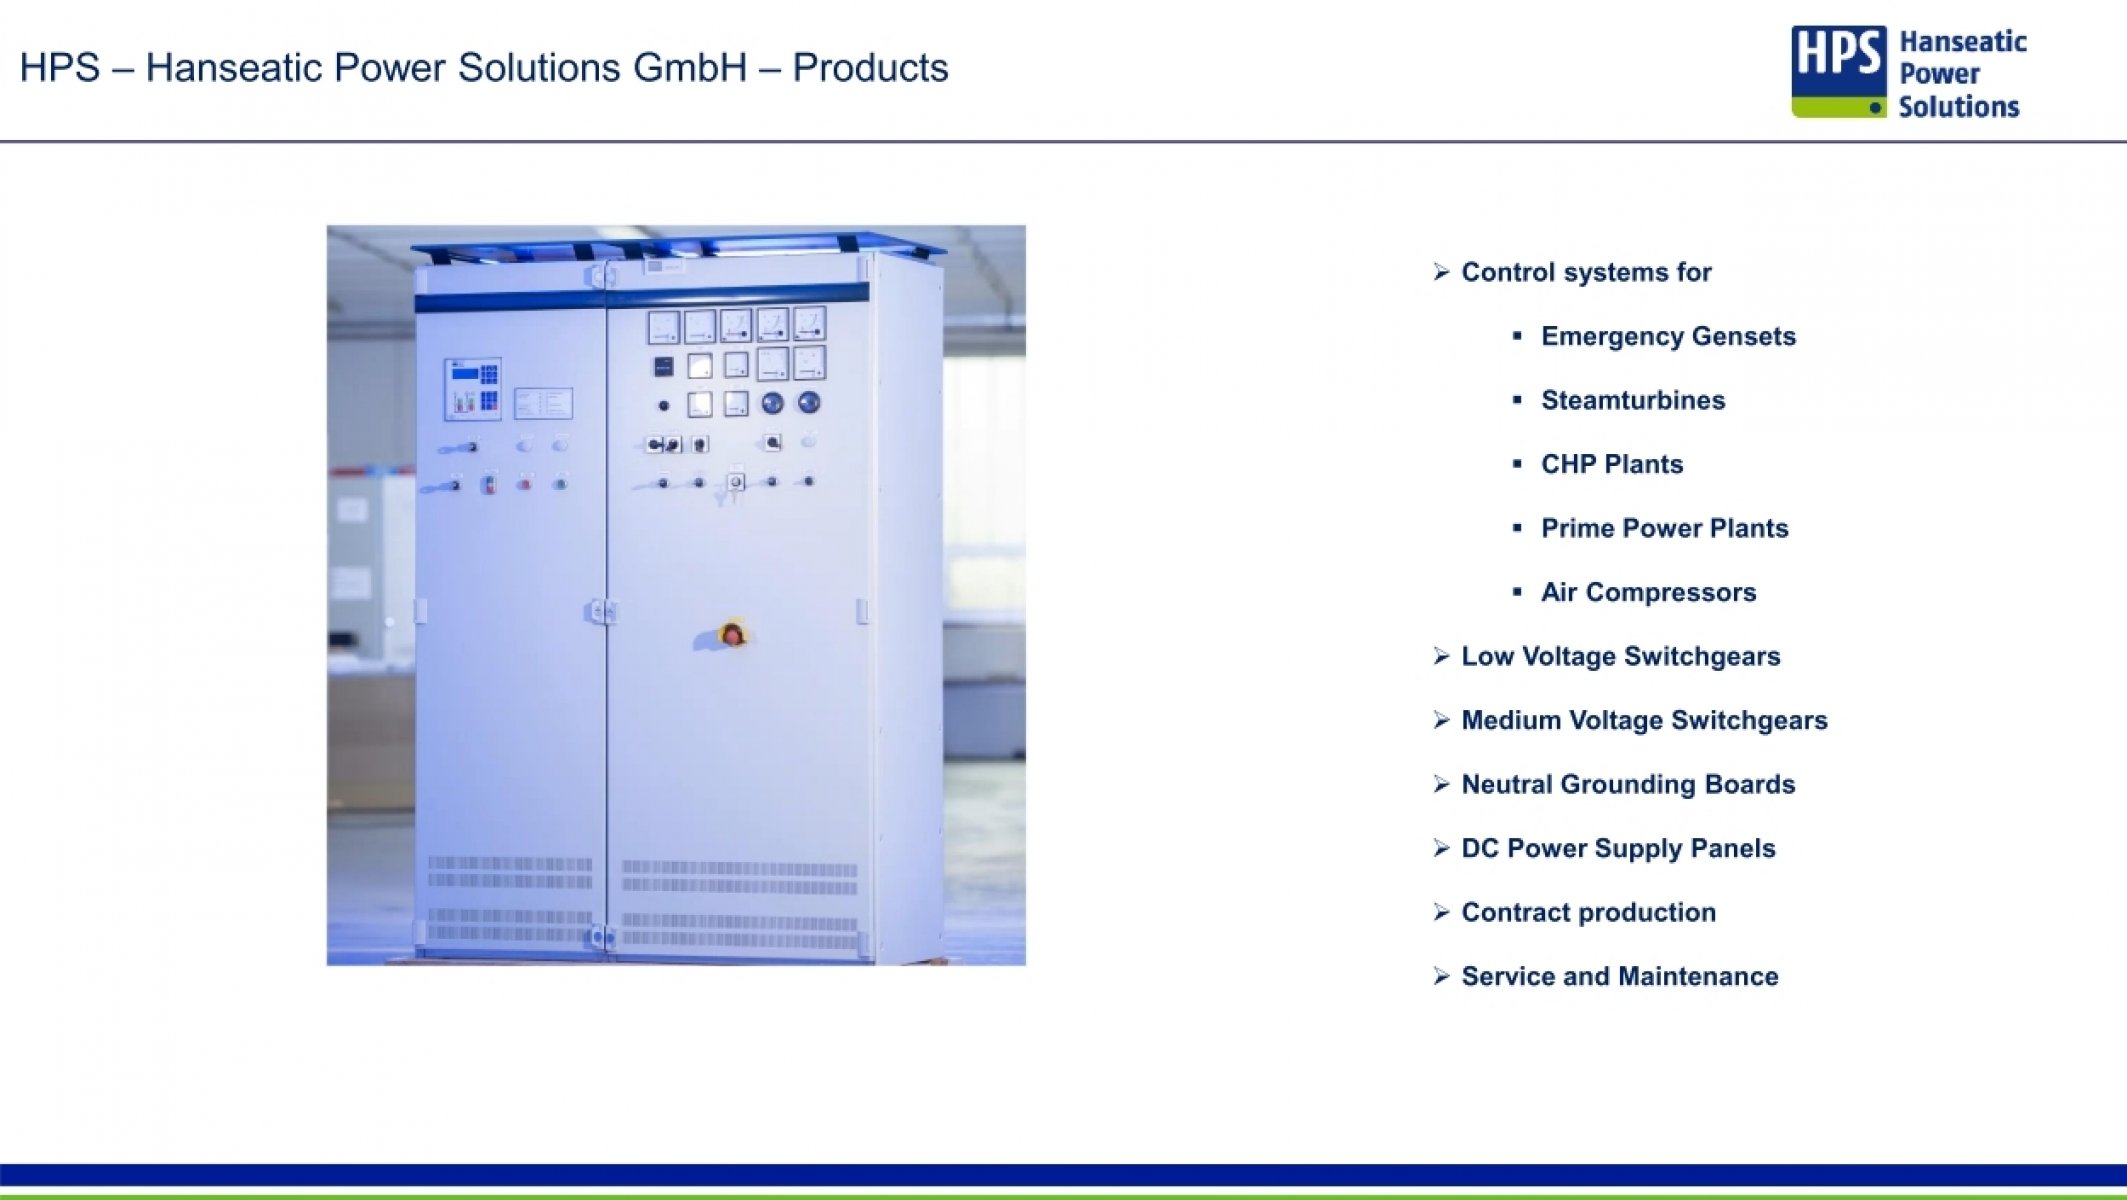 ComAp Product Solutions - HPS - Hanseatic Power Solutions